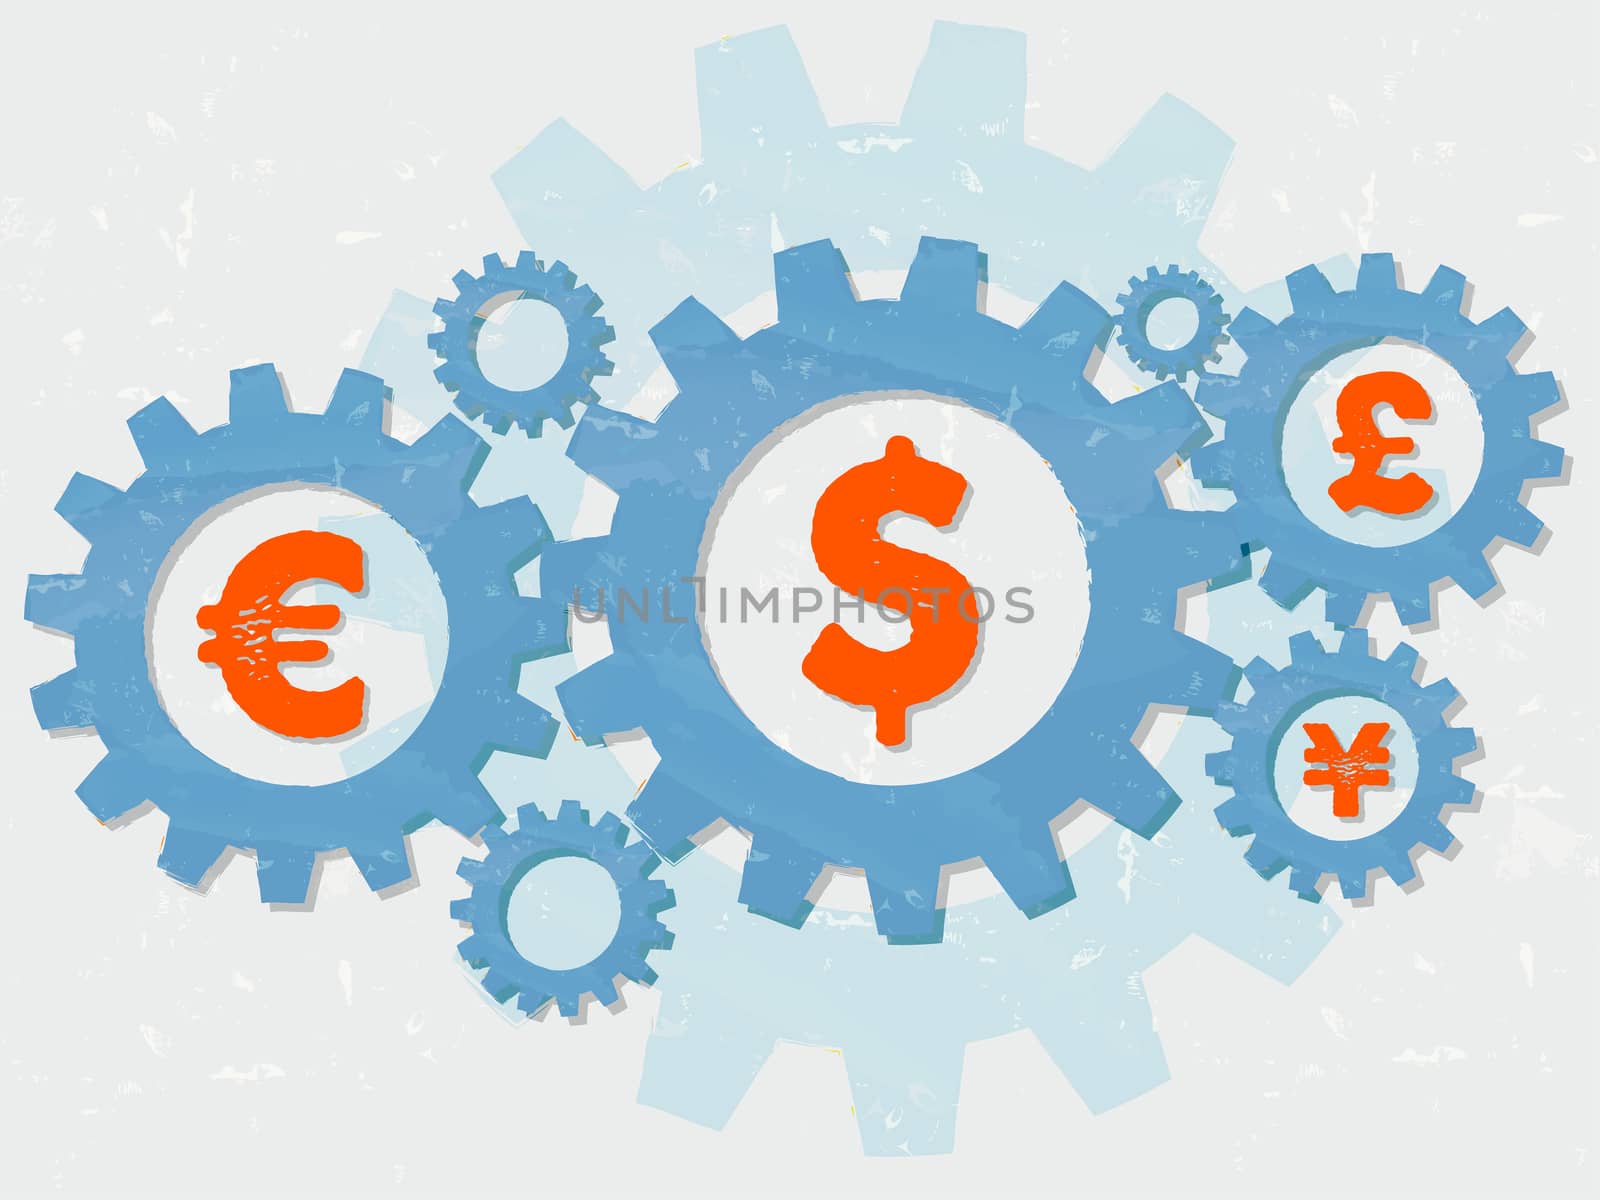 euro, dollar, pound and yen signs - business finance and monetary units concept - red symbols in blue grunge flat design gear wheels